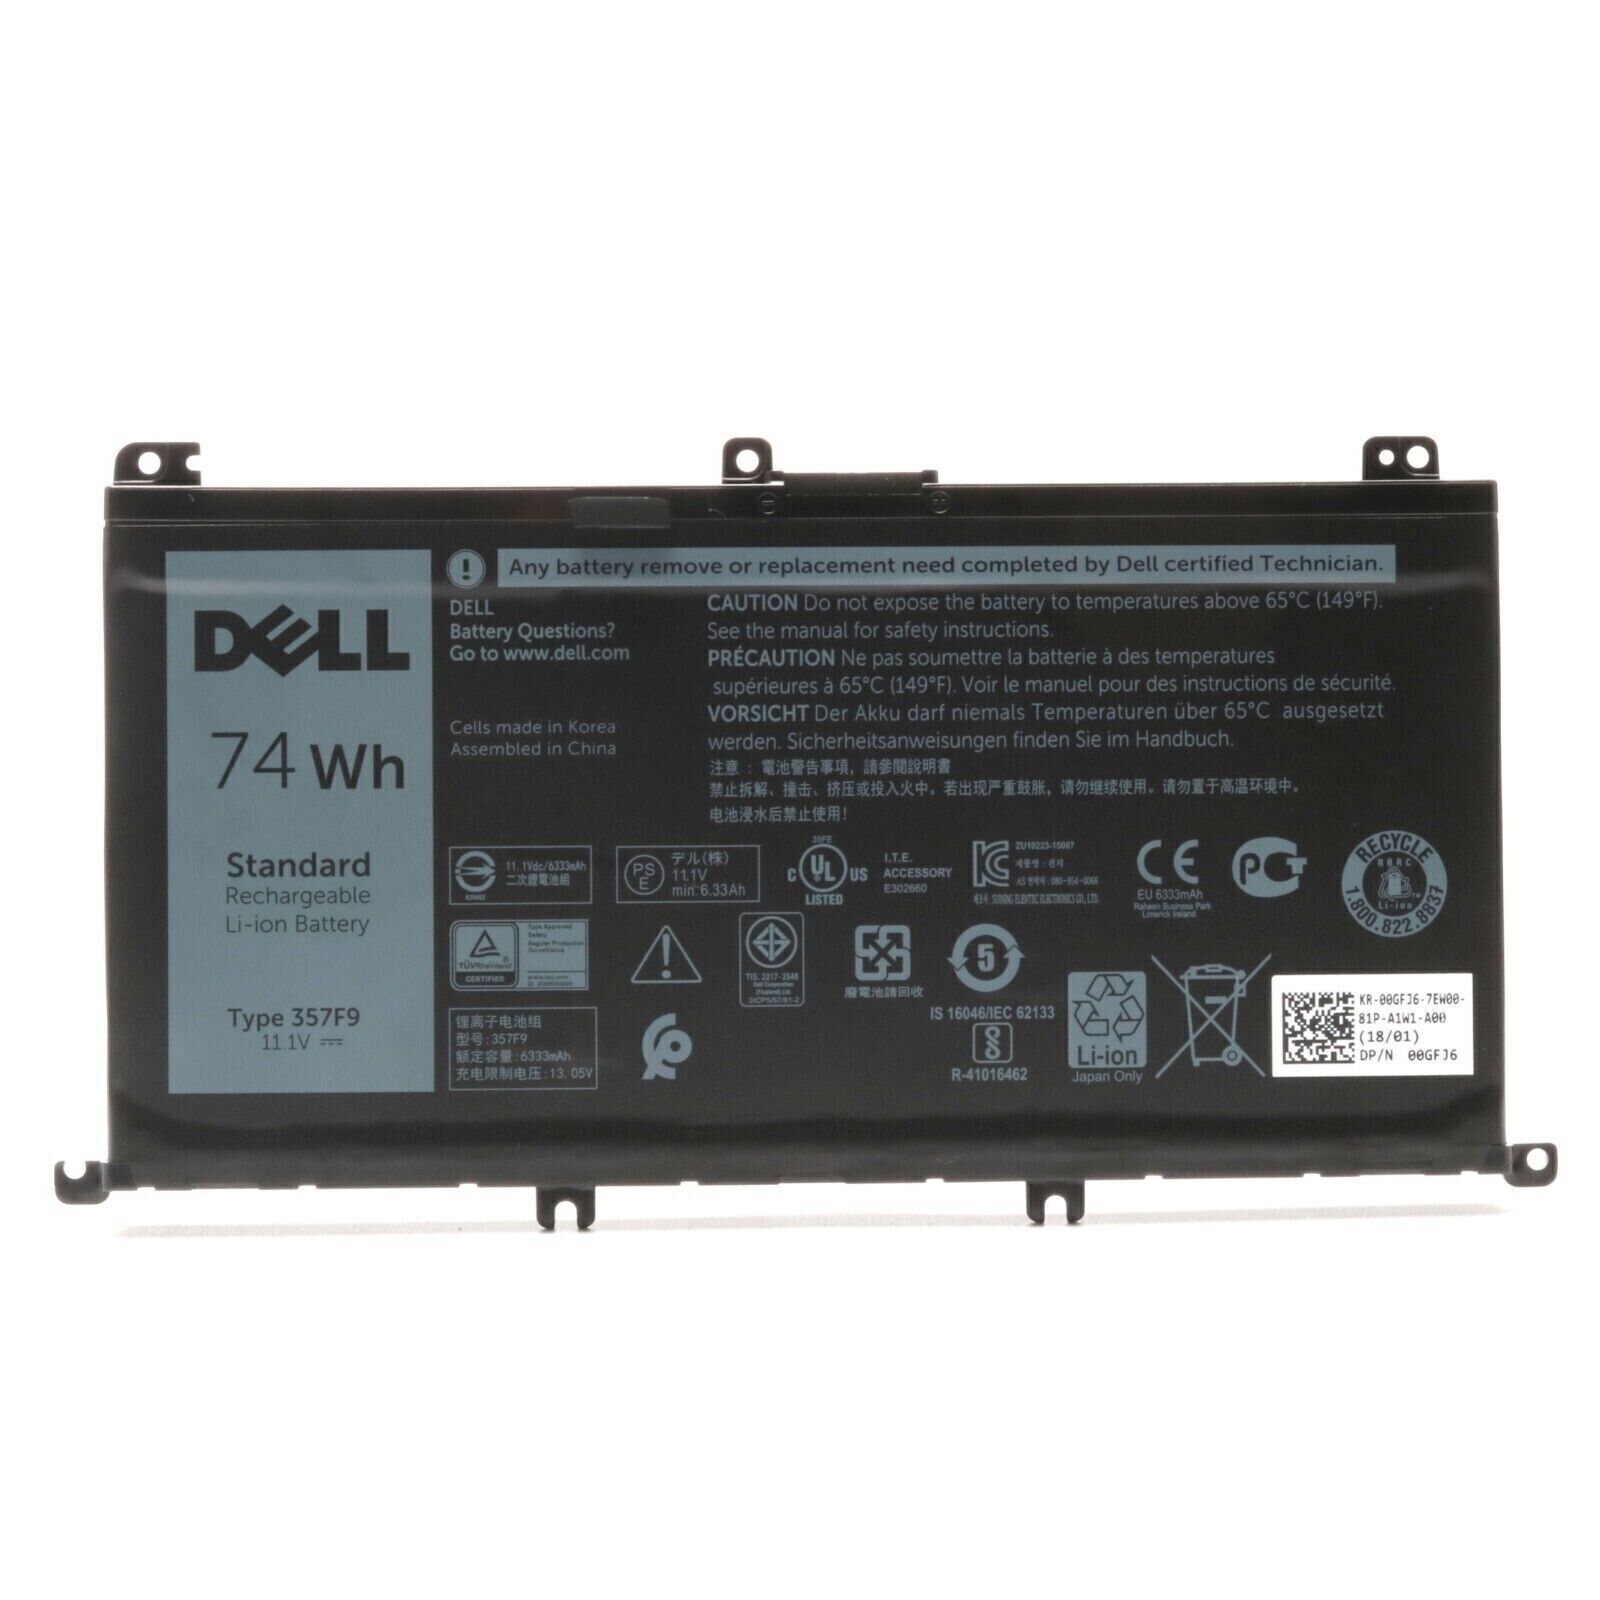 NEW Genuine 74Wh 357F9 Battery For Dell Inspiron 5576 5577 7566 7577 7557 7559